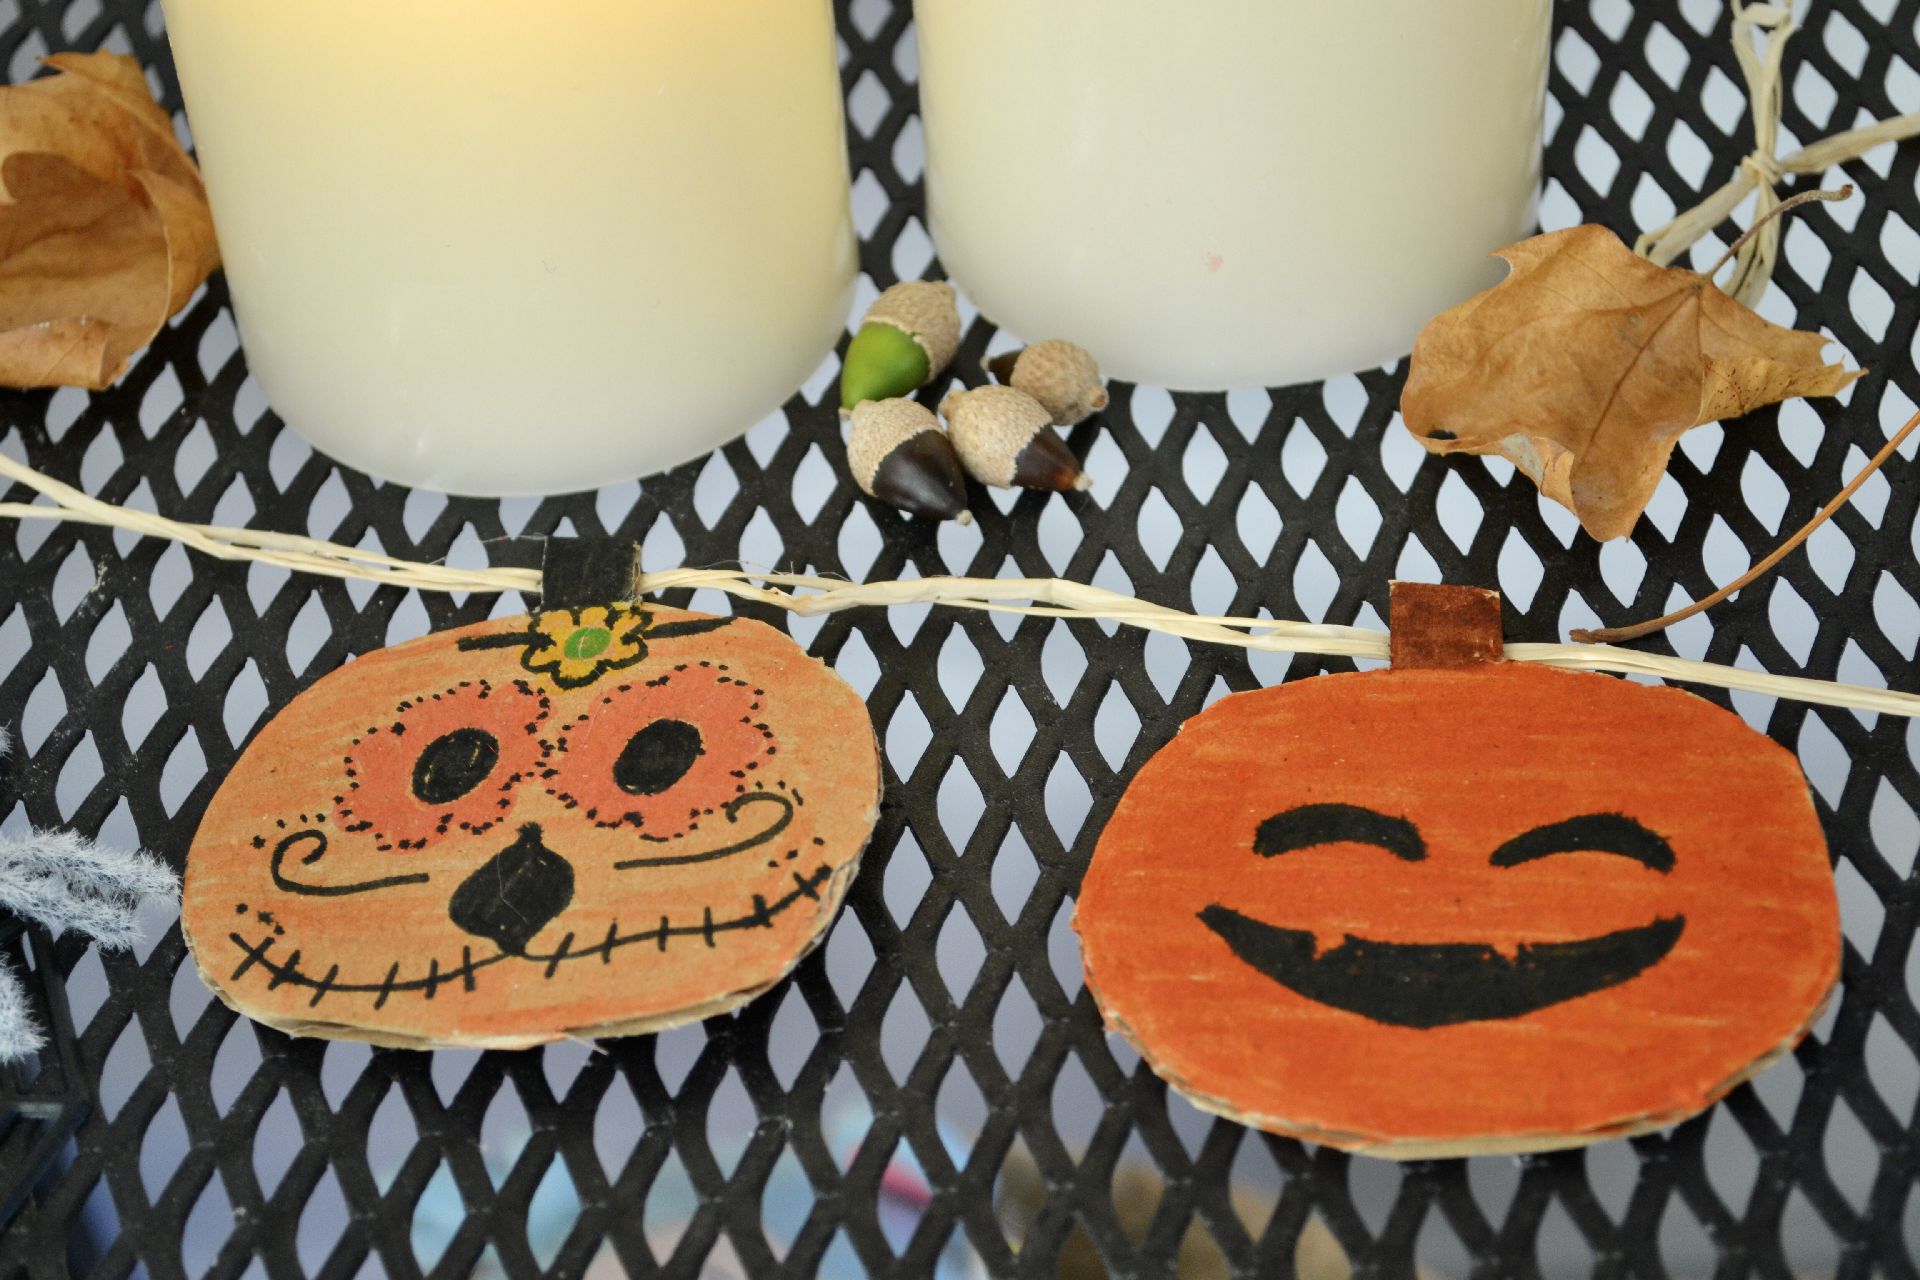 The finished decorated pumpkins attached to the string